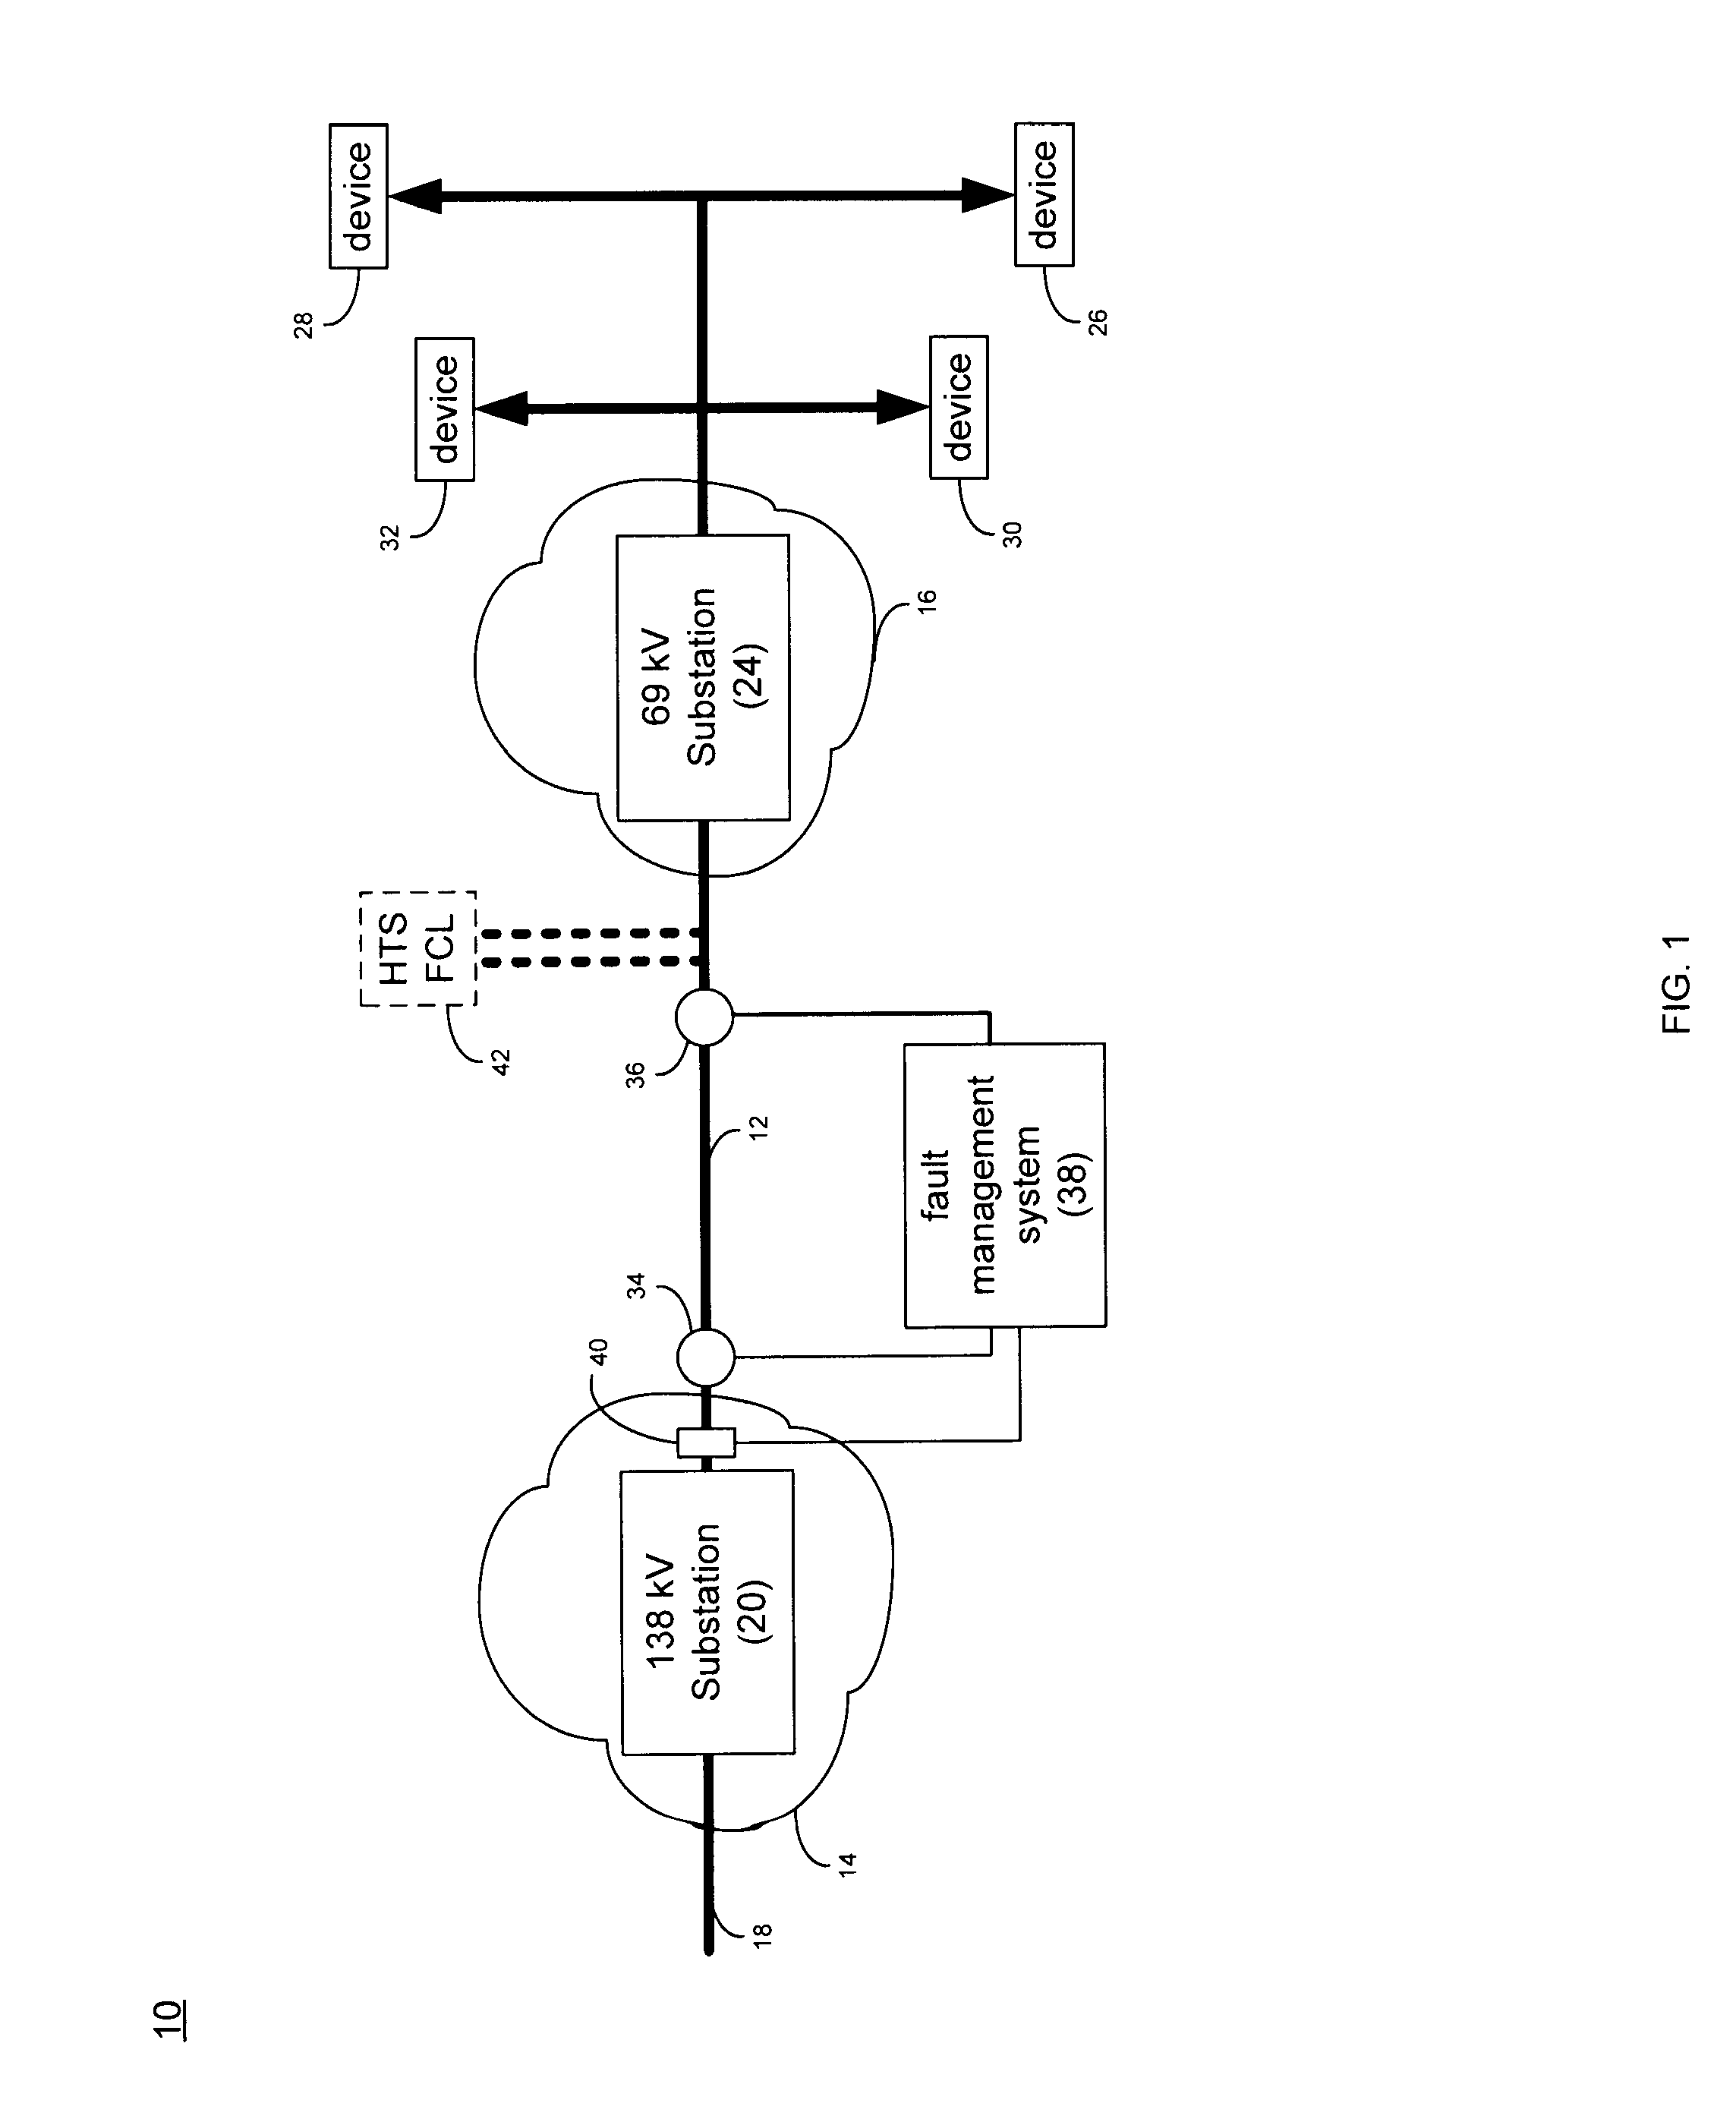 Fault Current Limiting HTS Cable and Method of Configuring Same